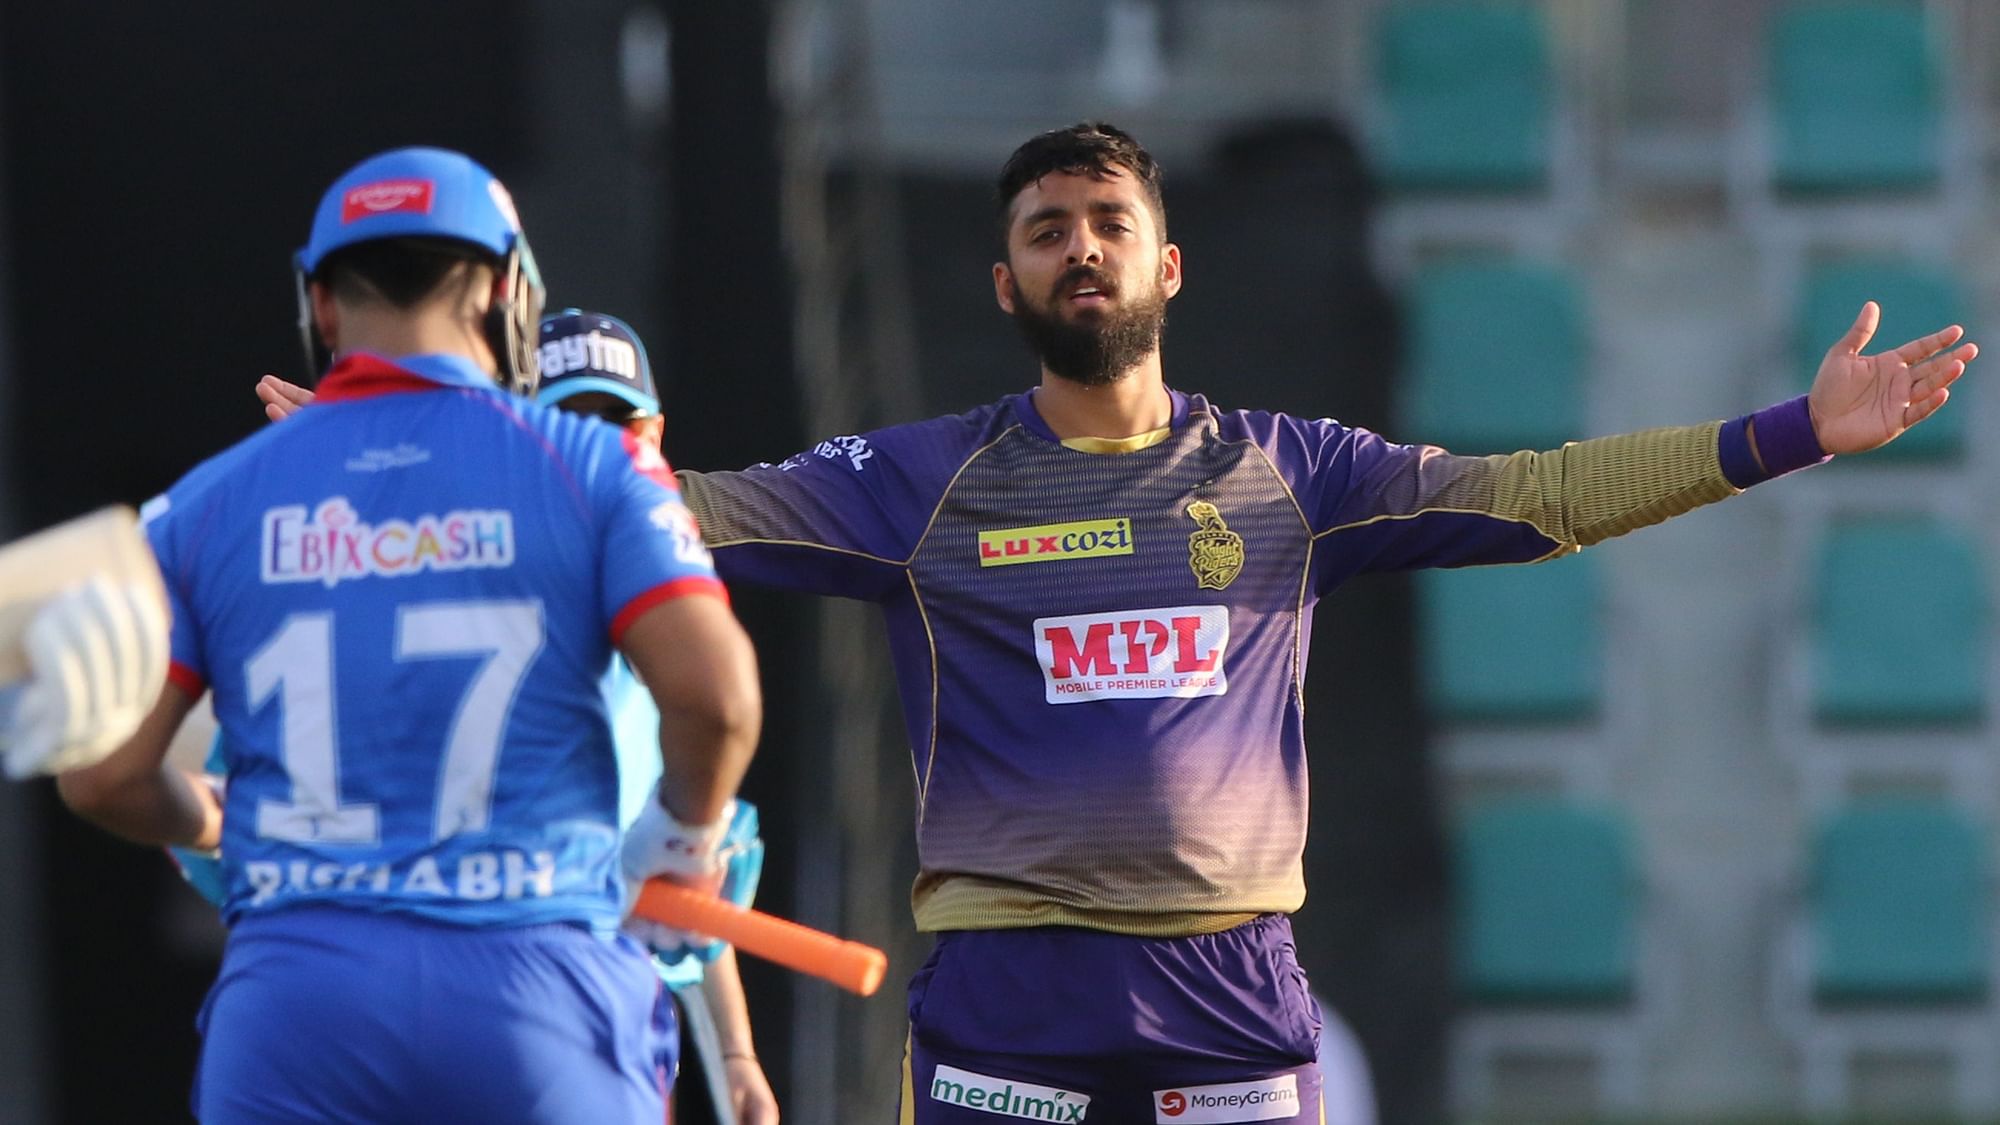 Kolkata Knight Riders’ ace leg-spinner Varun Chakravarthy has been named in the Indian T20 squad for the upcoming tour of Australia.